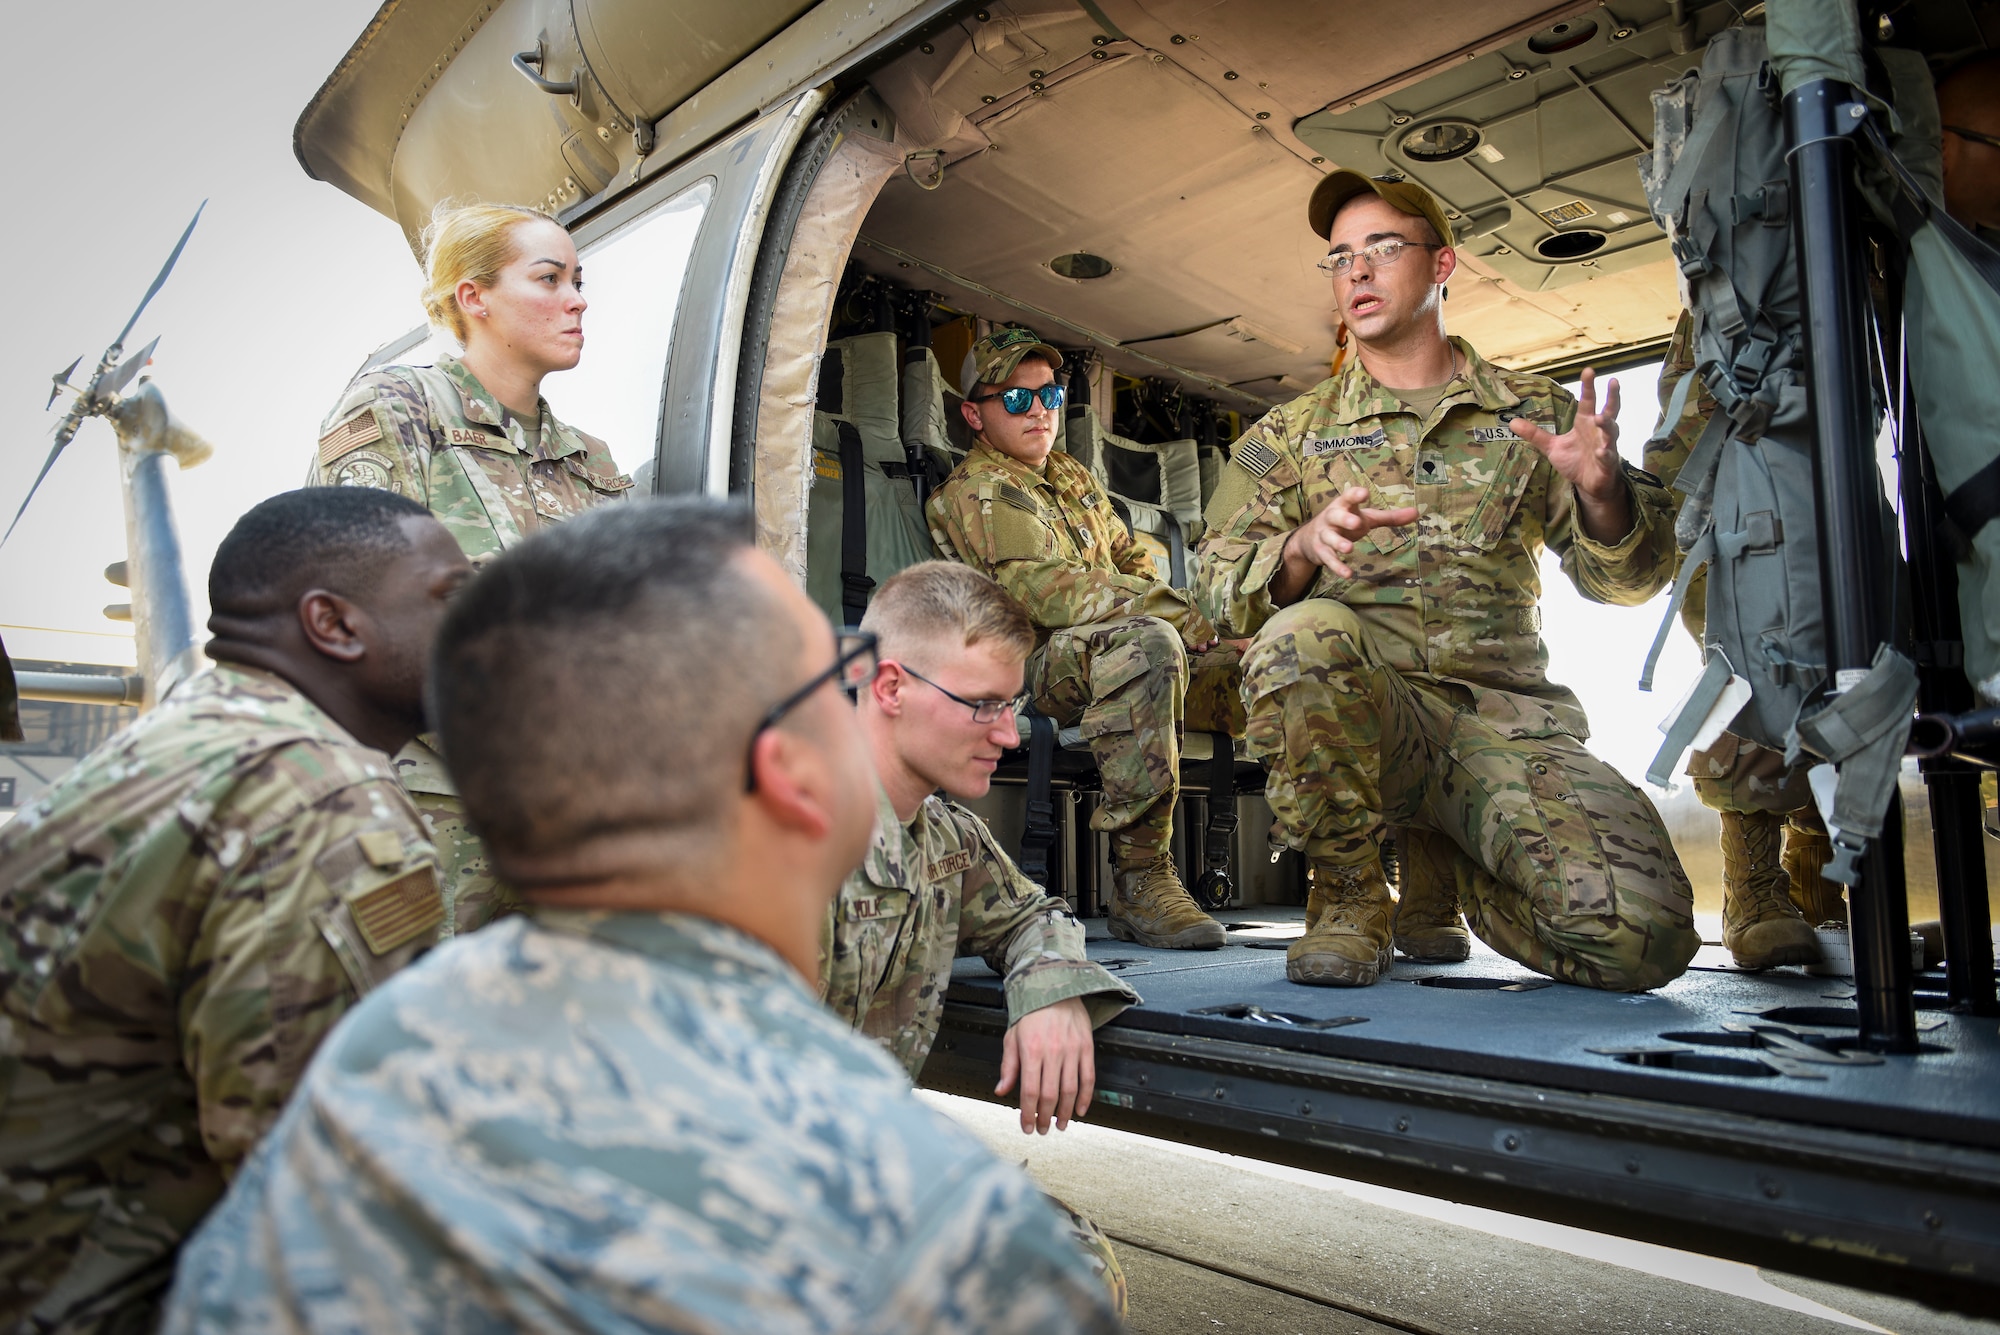 A group of military members listening to another talk inside a helicopter